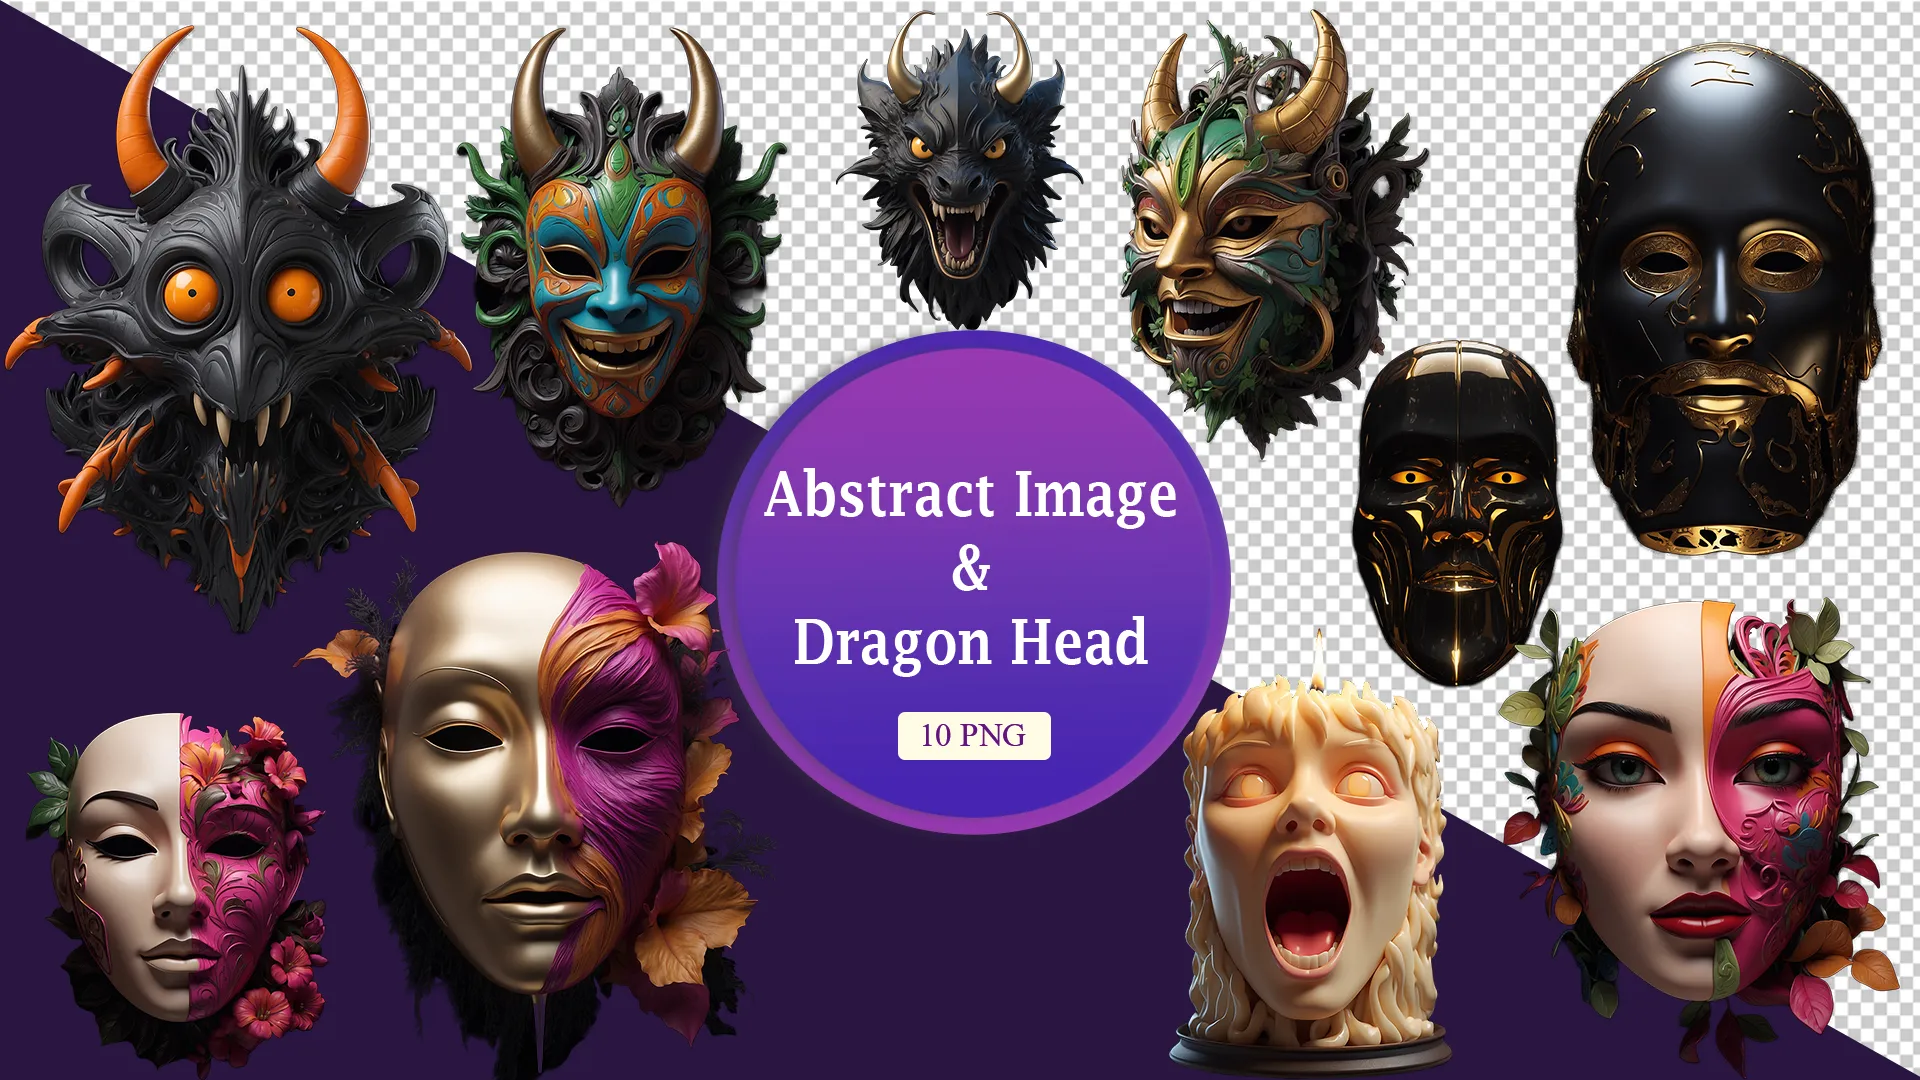 From Floral Fantasy to Fierce Dragons 3D Pack